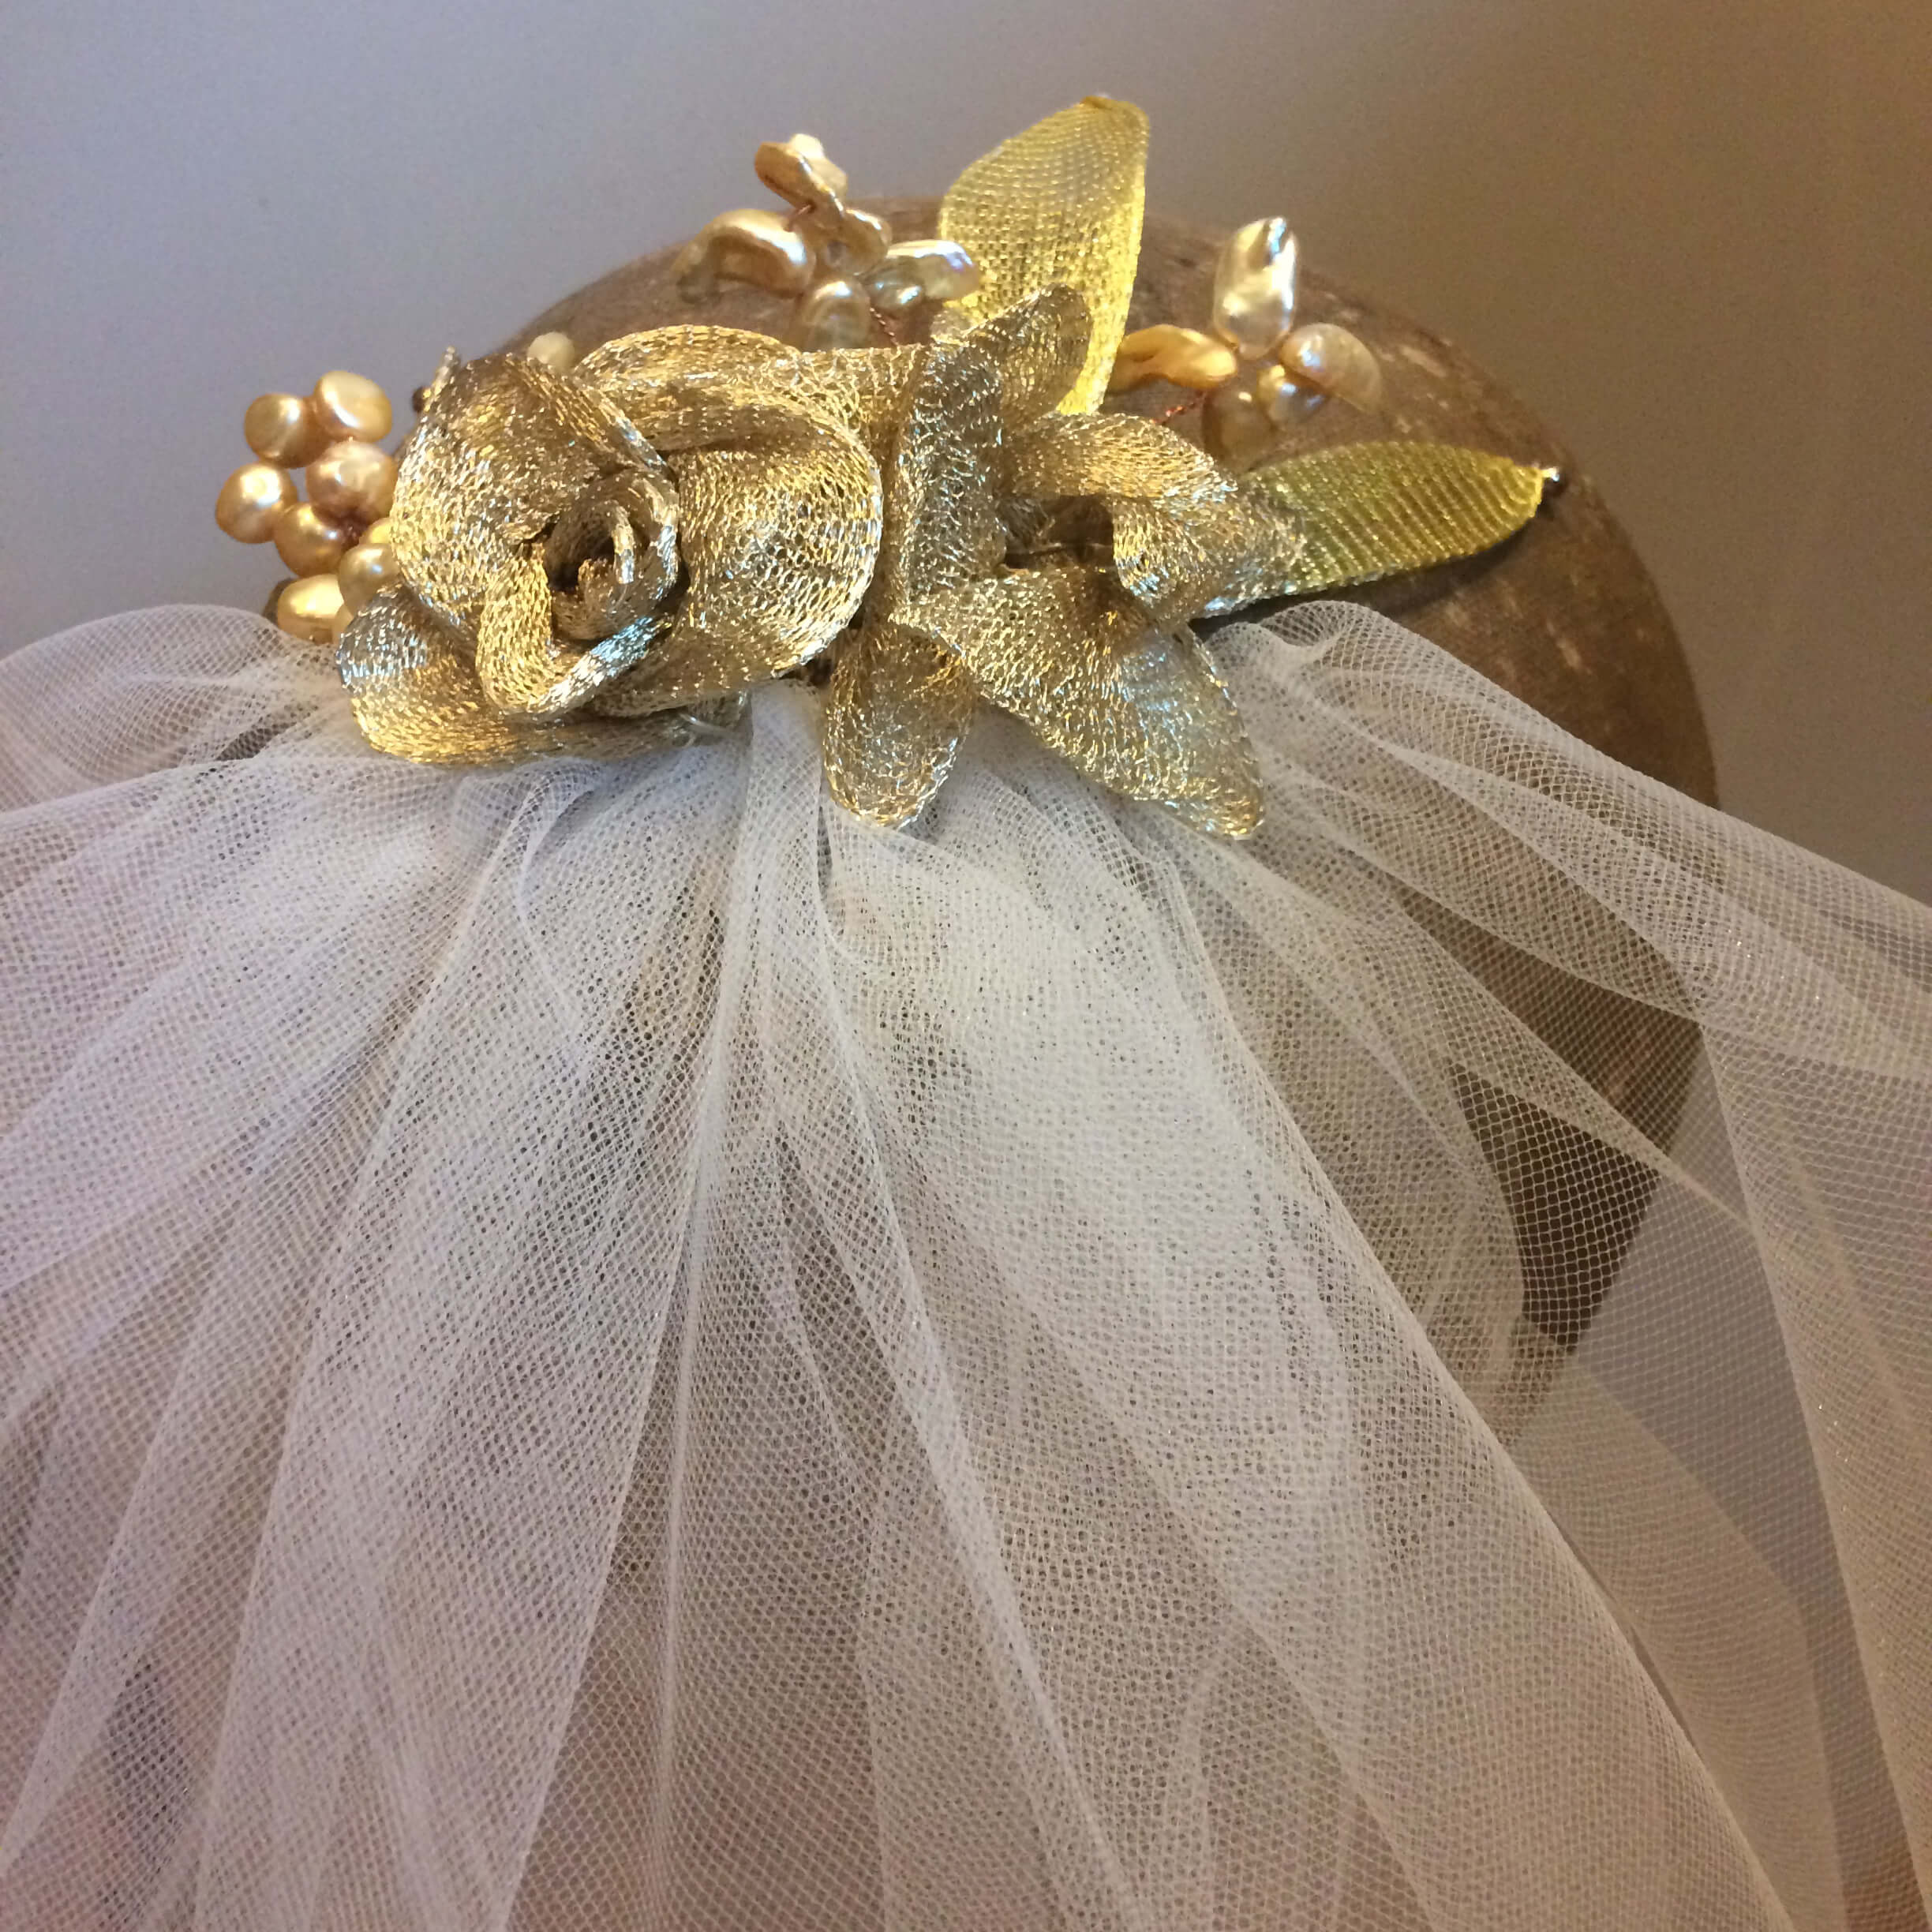 Veil with gold detailing.